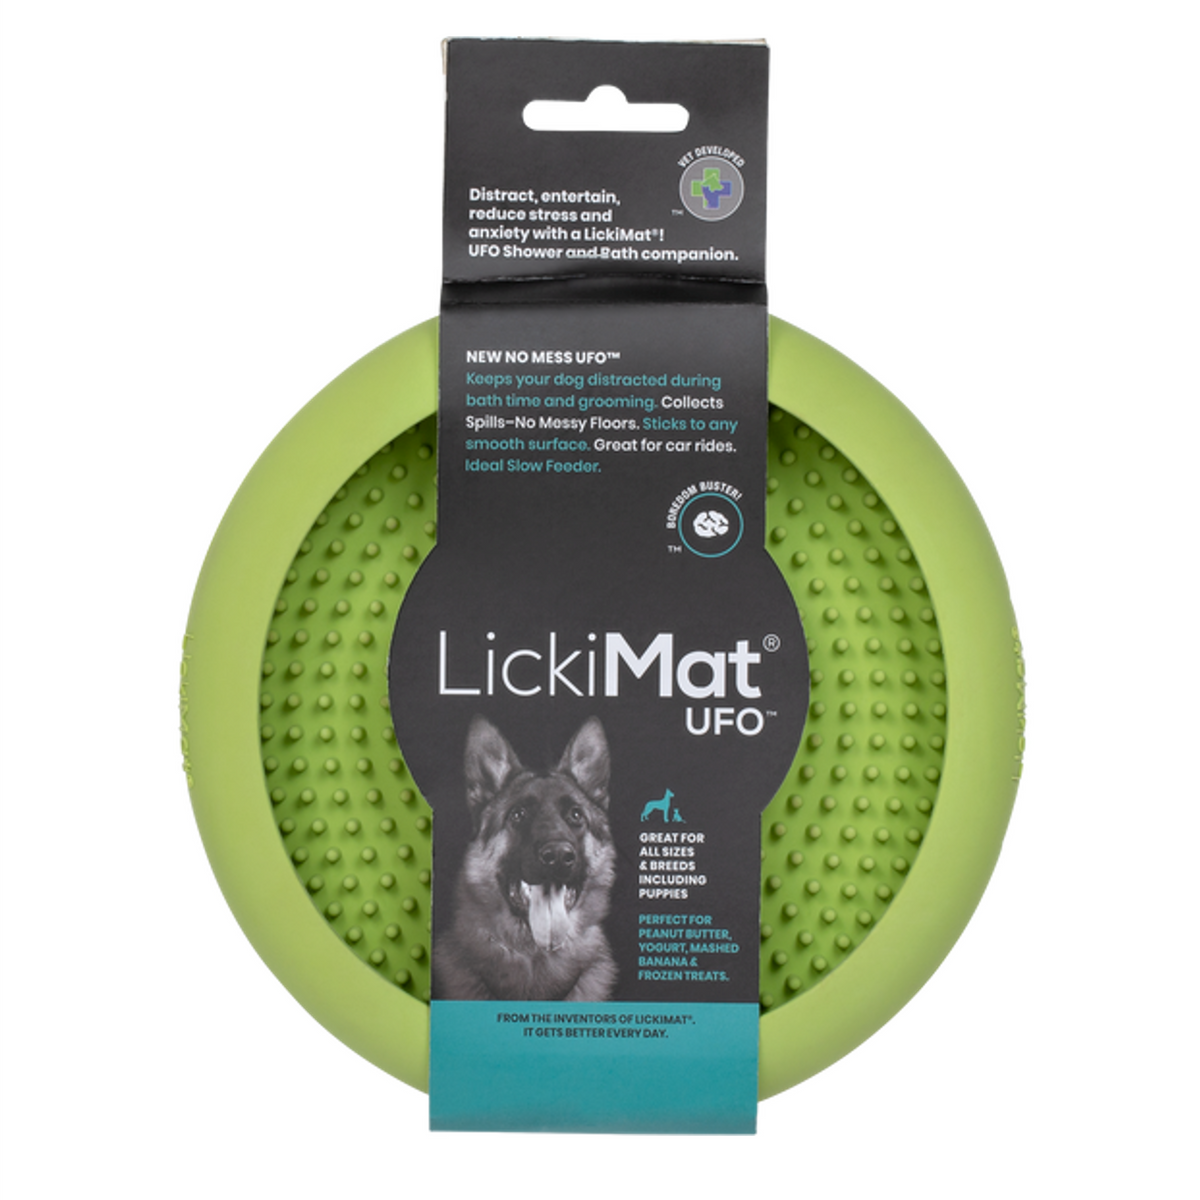 Large Lick Mat for Dogs & Cats with Suction Cups, Licking Mat for Dog  Anxiety Re